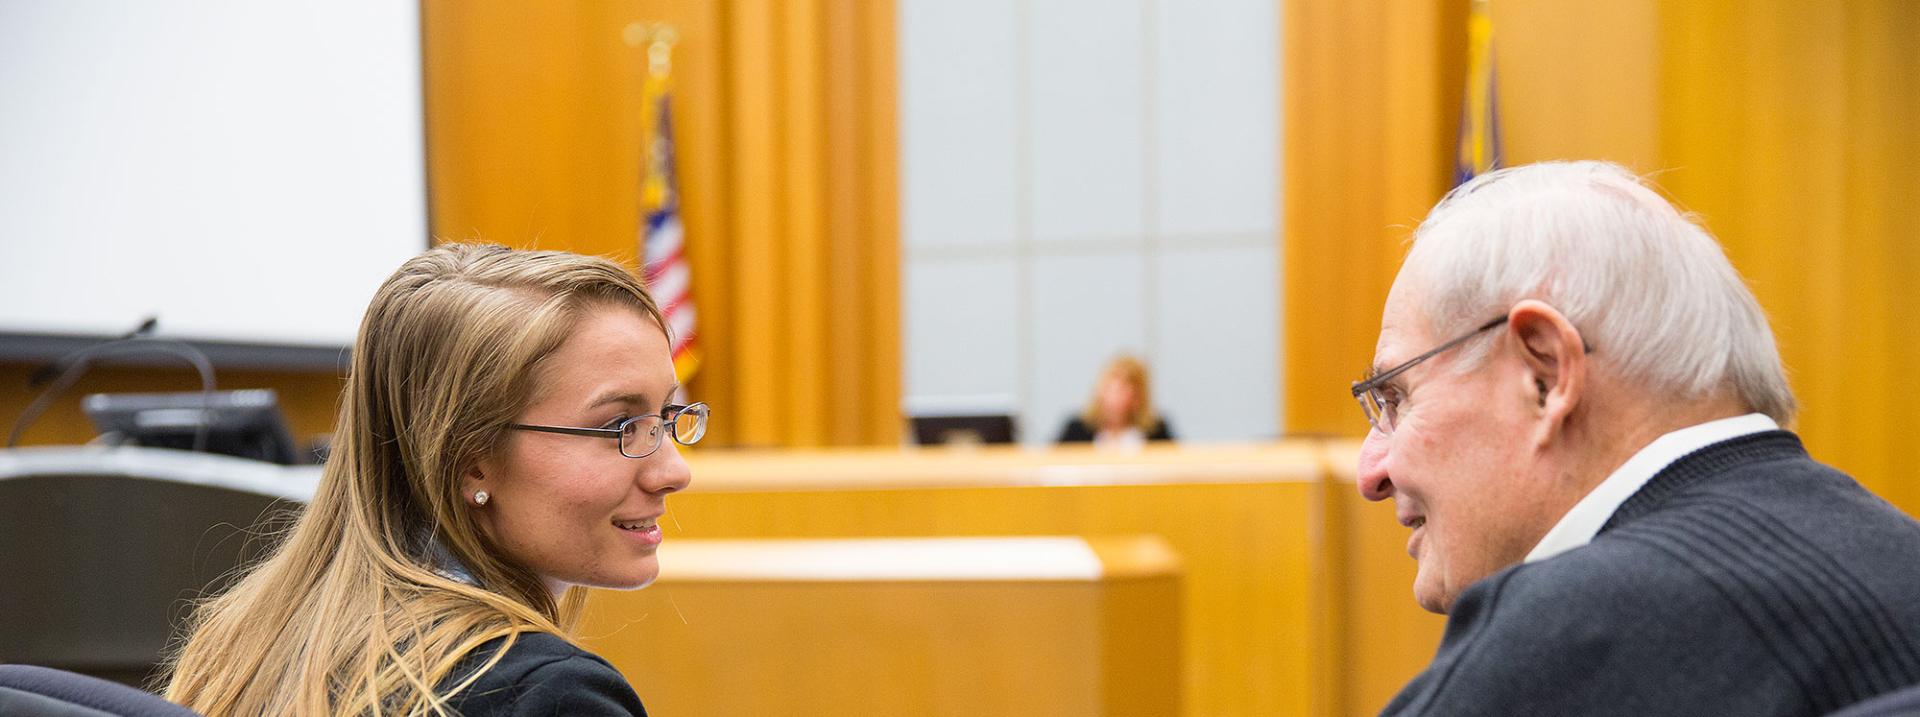 Student and mentor in a courtroom